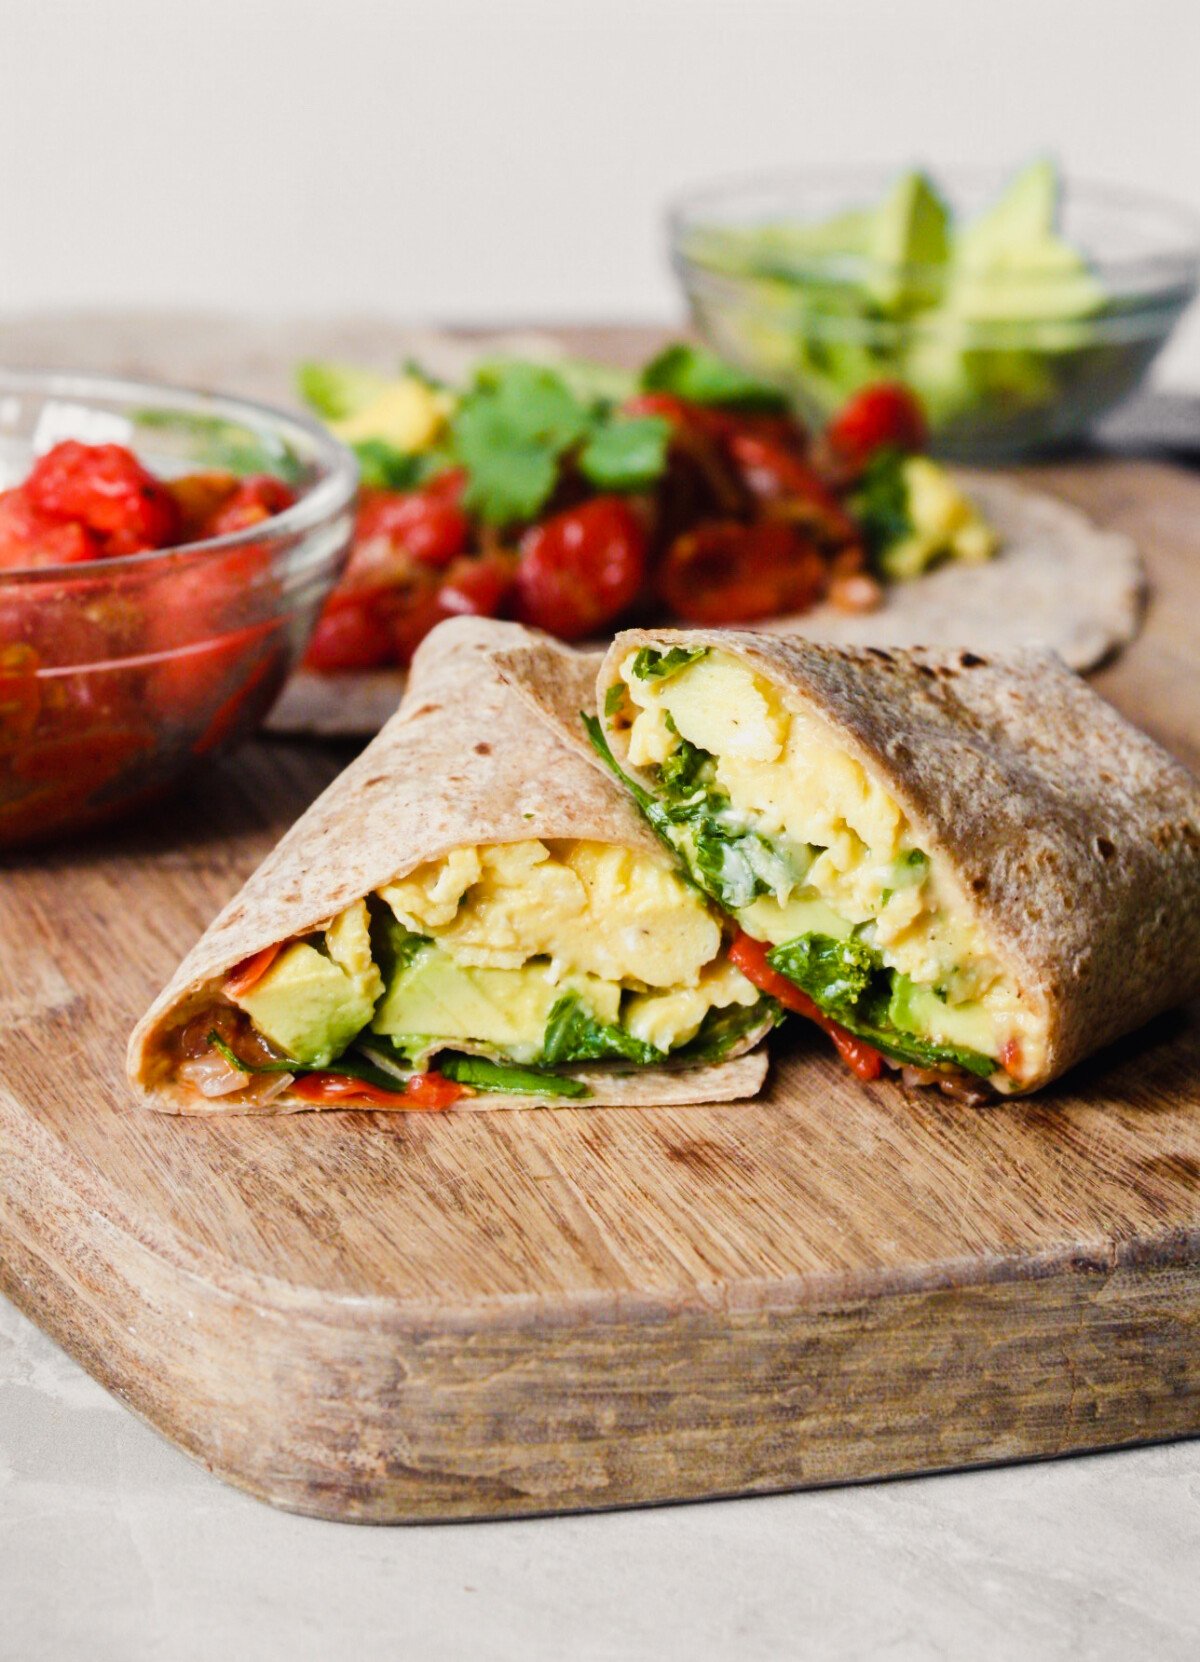 Photograph of a breakfast burrito on a wood cutting board